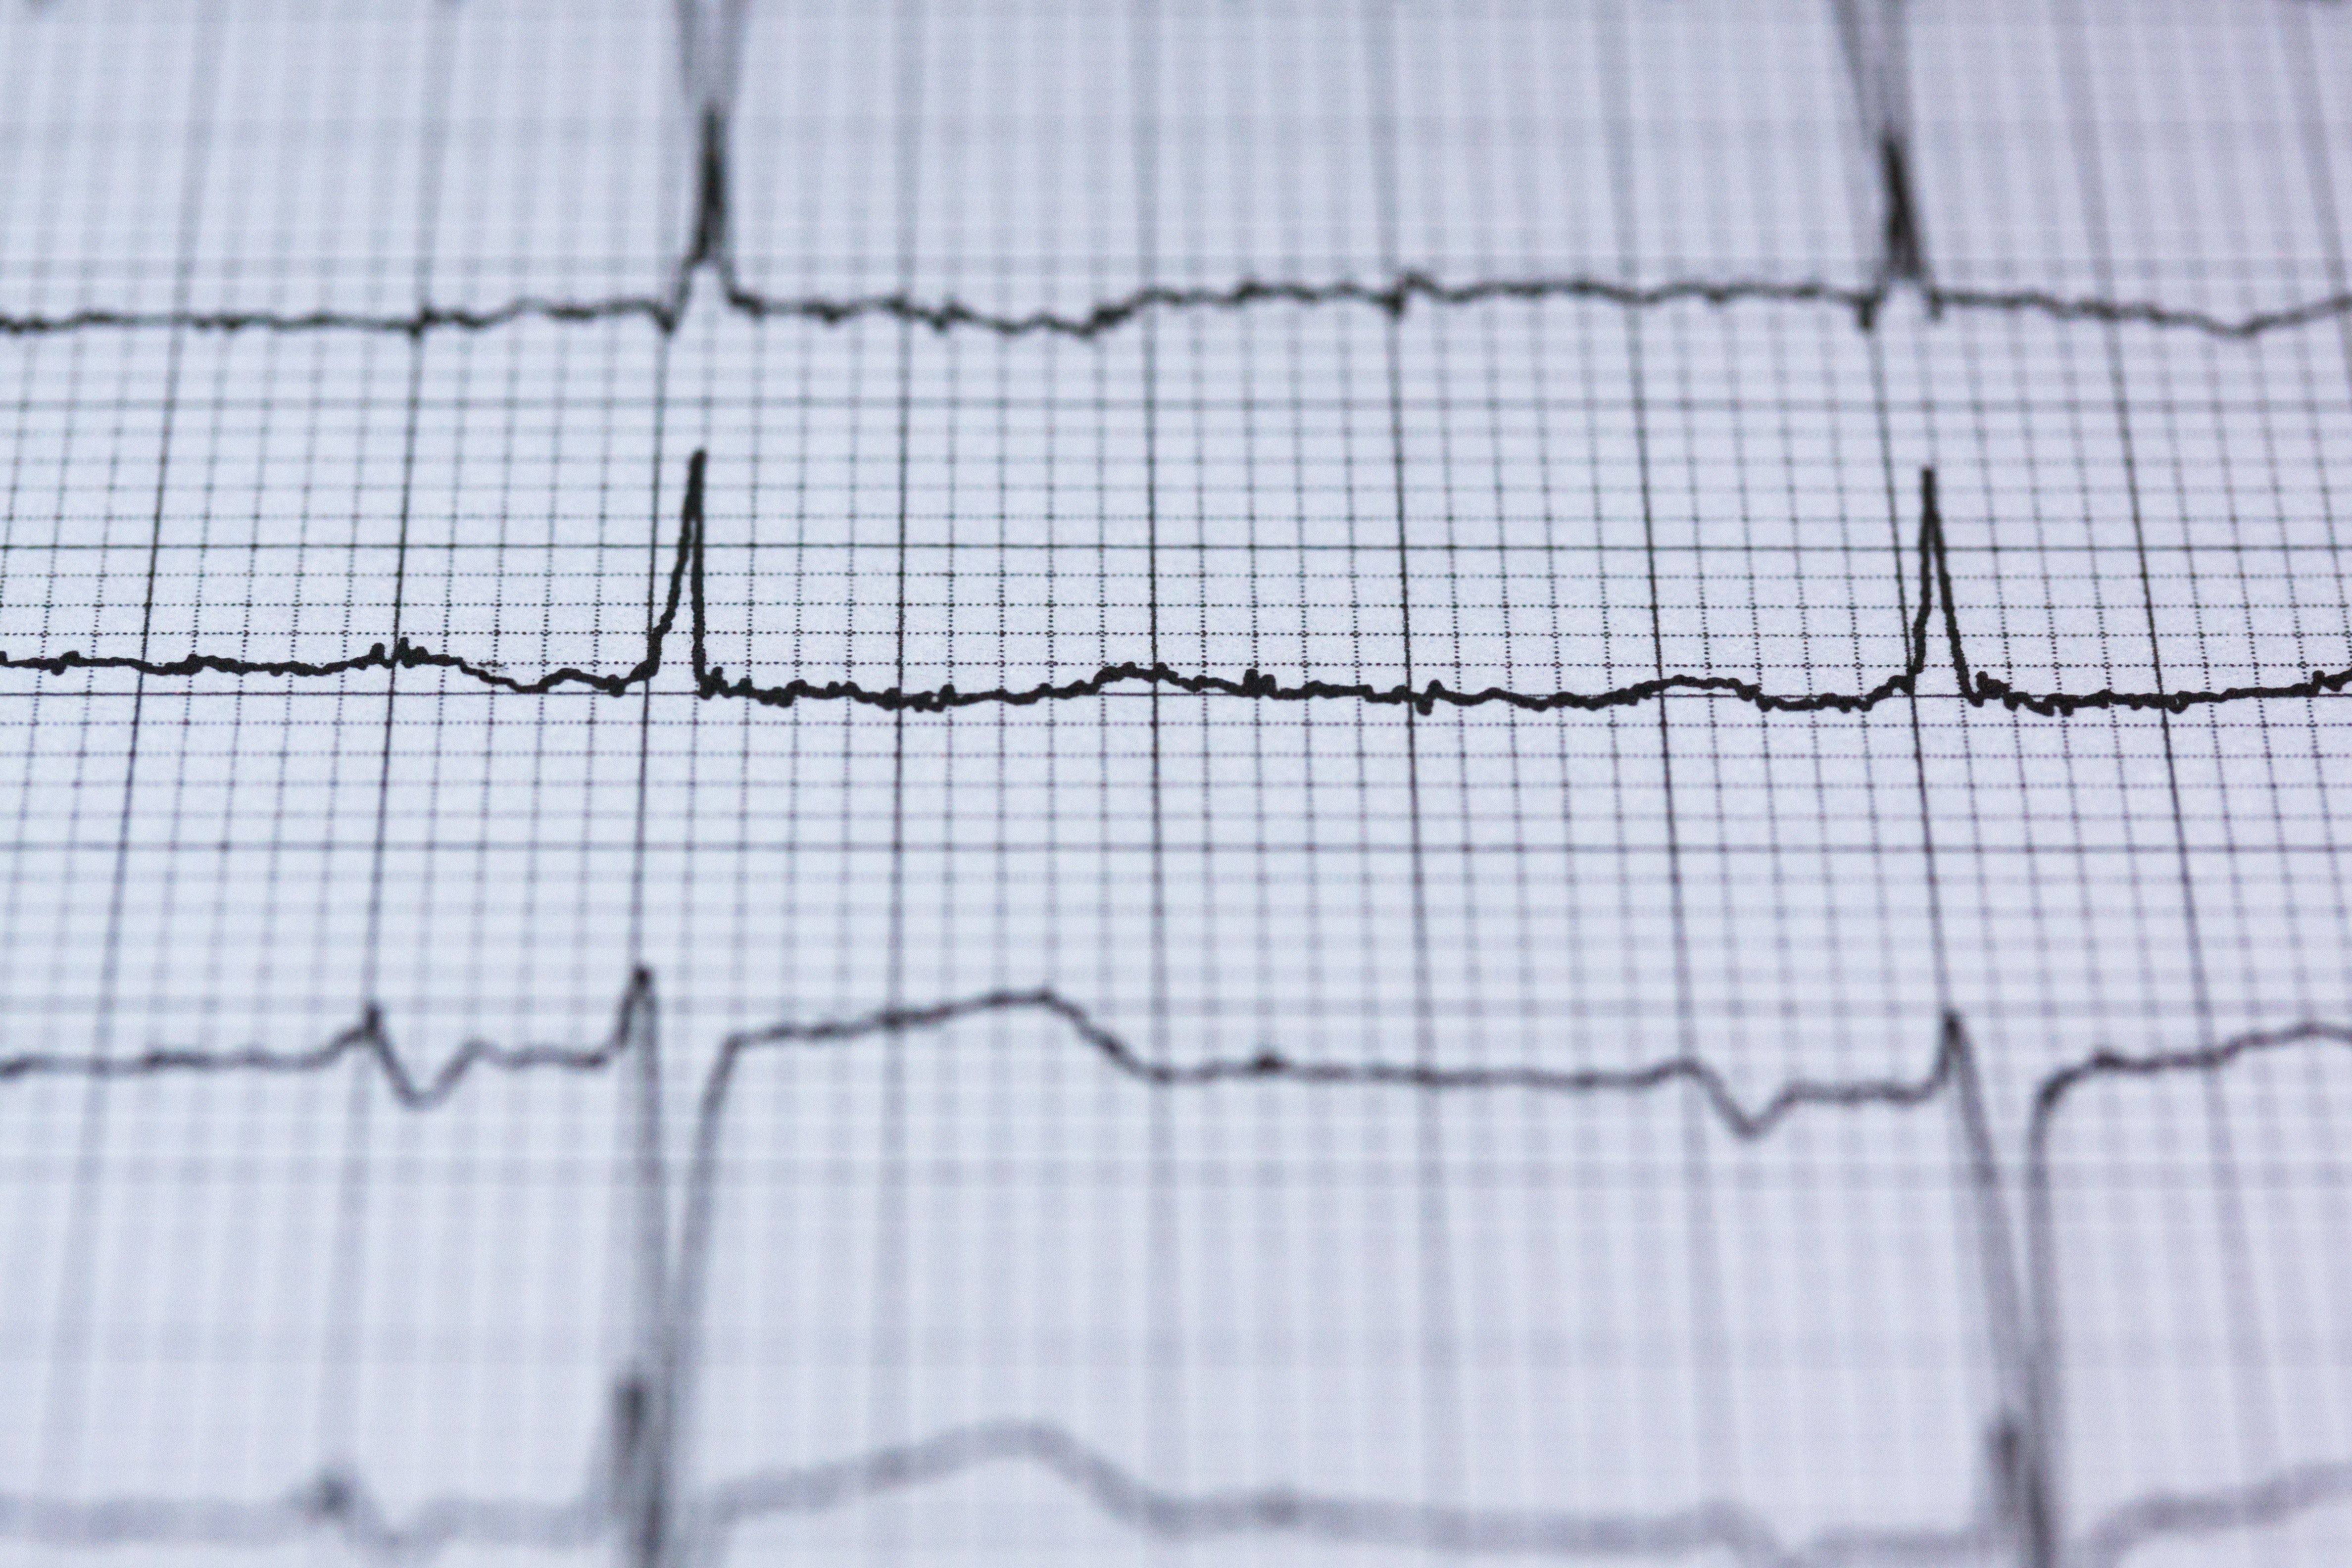 Atrial Fibrillation More Common in Adults with Sickle Cell Disease